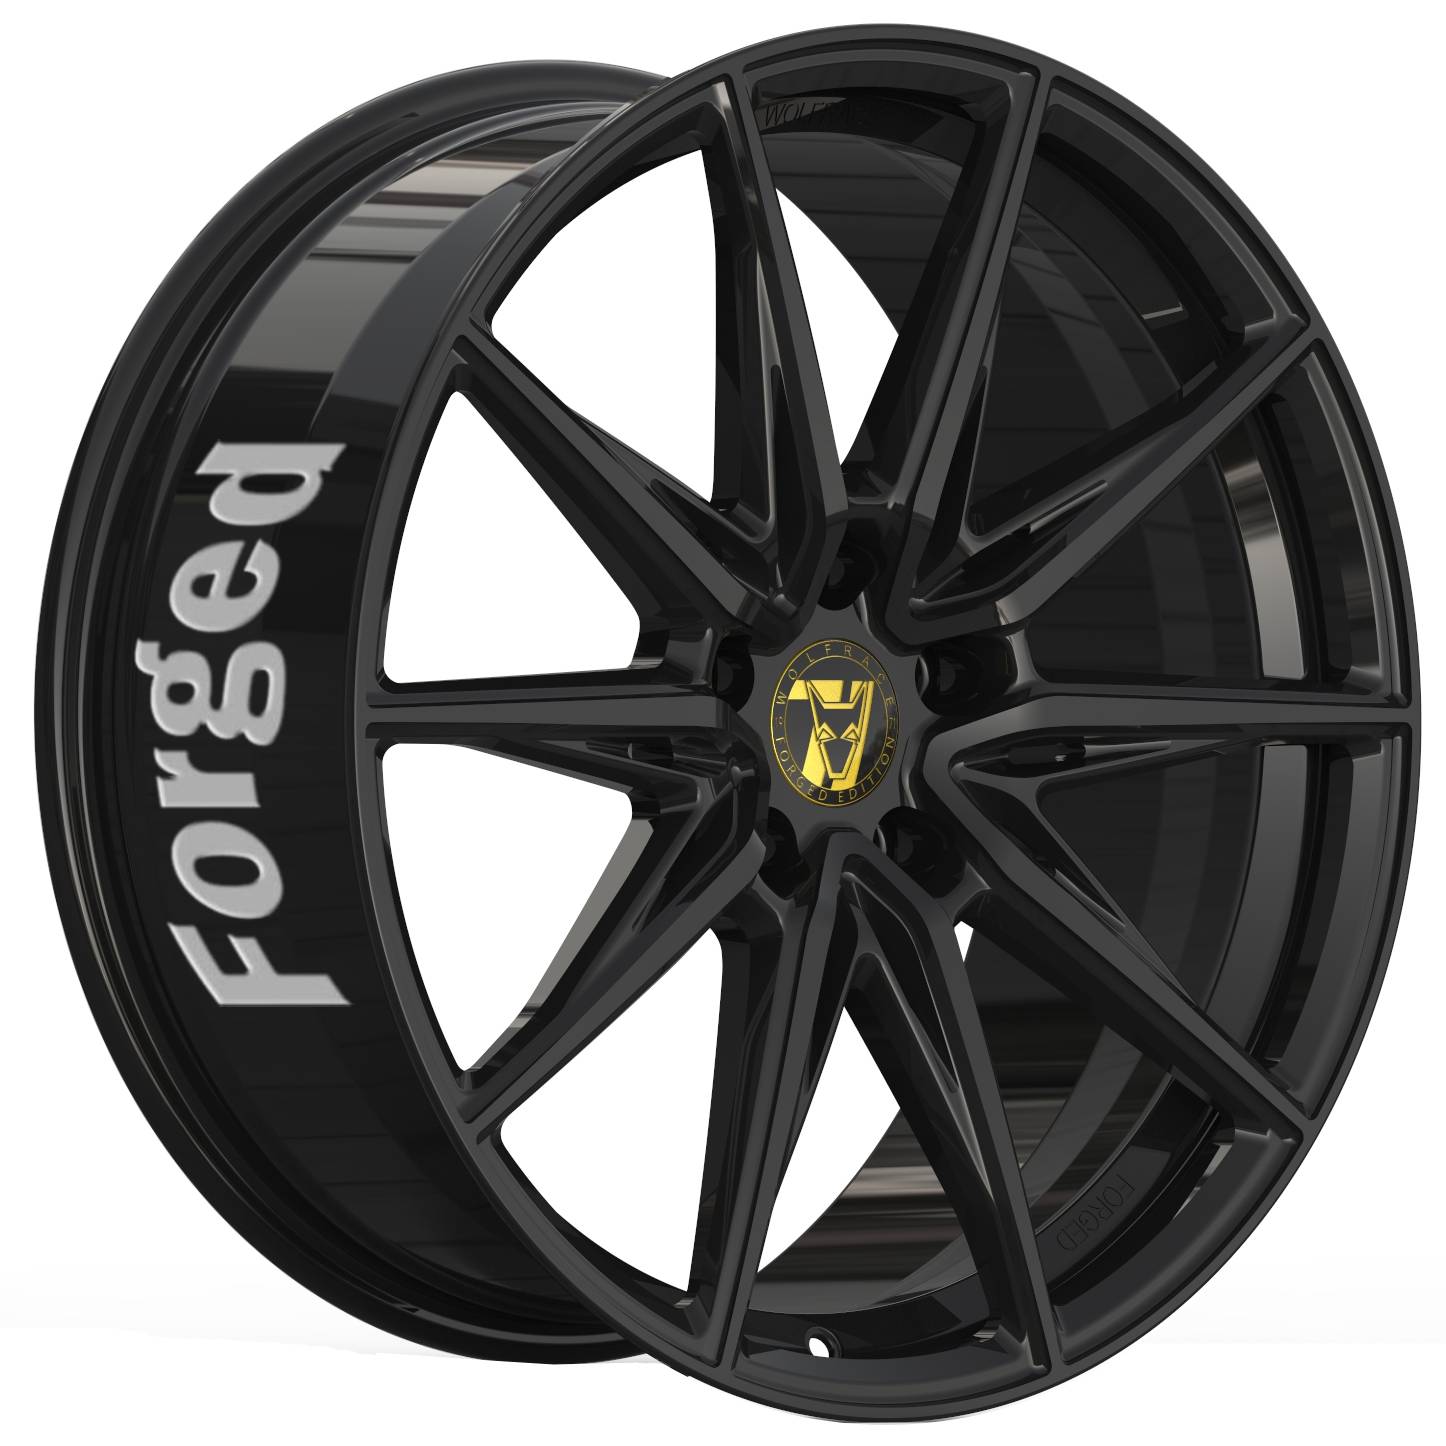 Demon Wheels 71 Forged Edition Urban Racer Forged [11x23] -5x114.3- ET 40